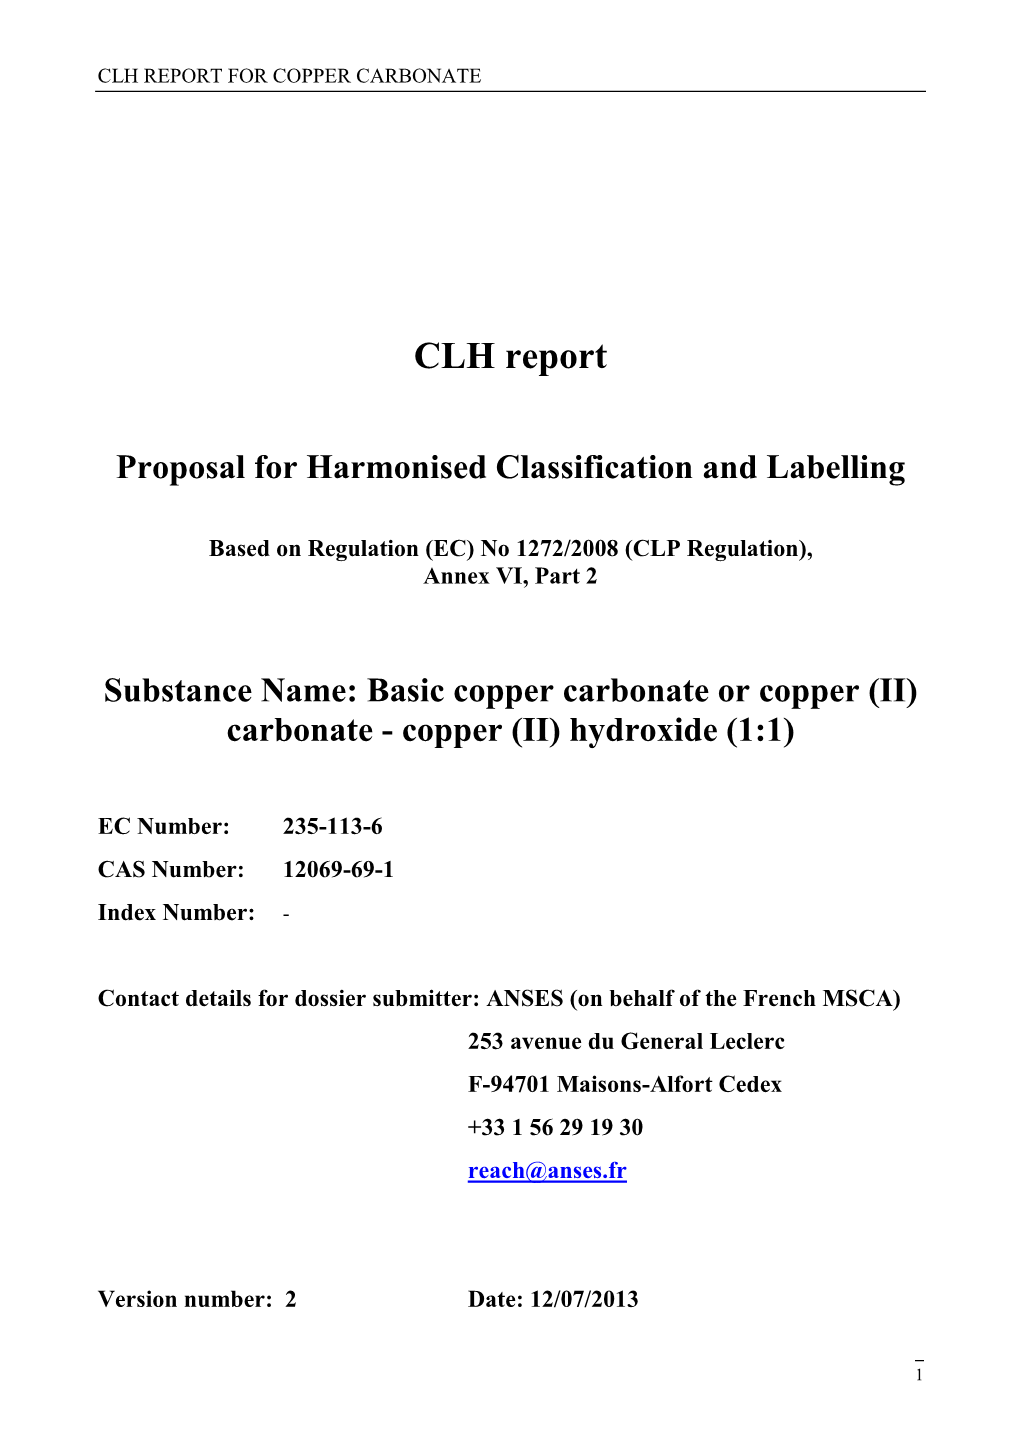 Proposal for Harmonised Classification and Labelling